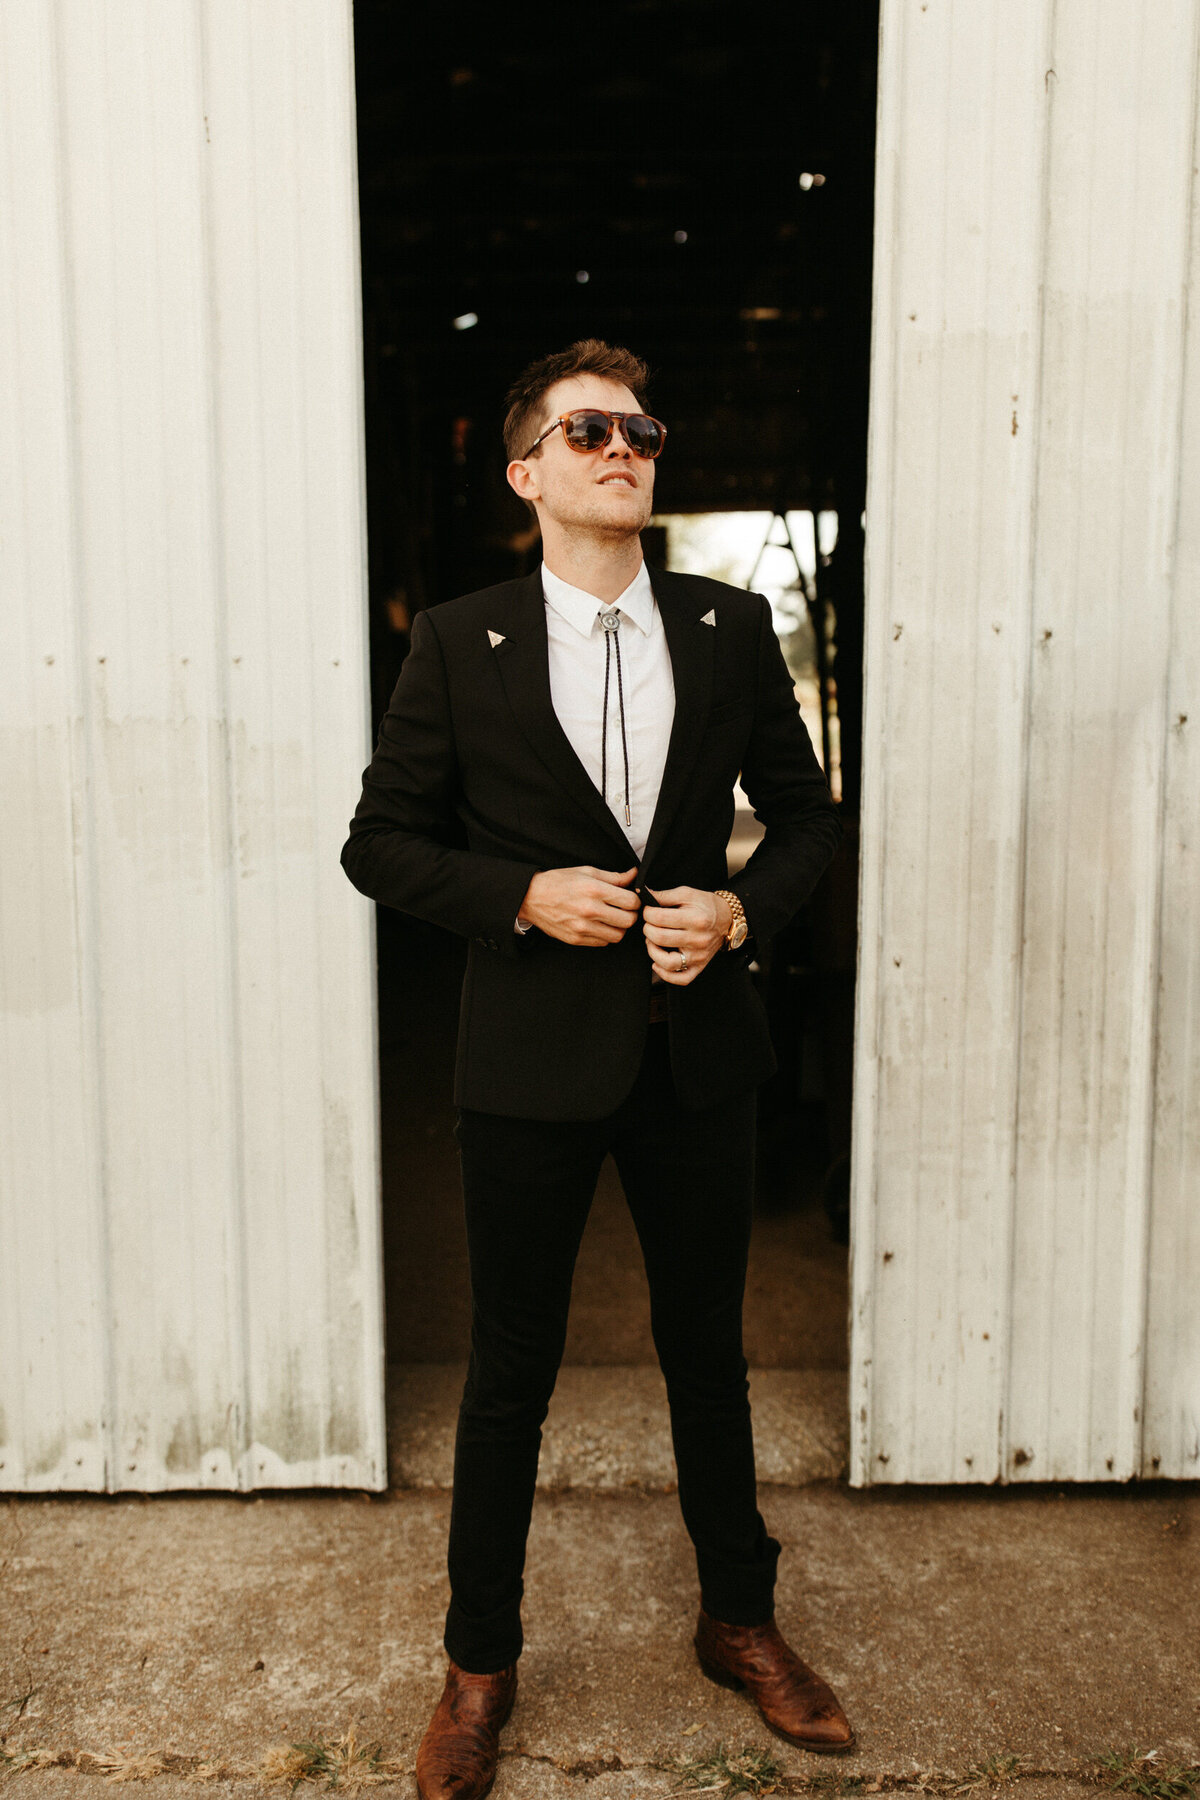 Boho groom with bolo tie, black suit and sunglasses getting ready in front of a barn on the morning of his wedding